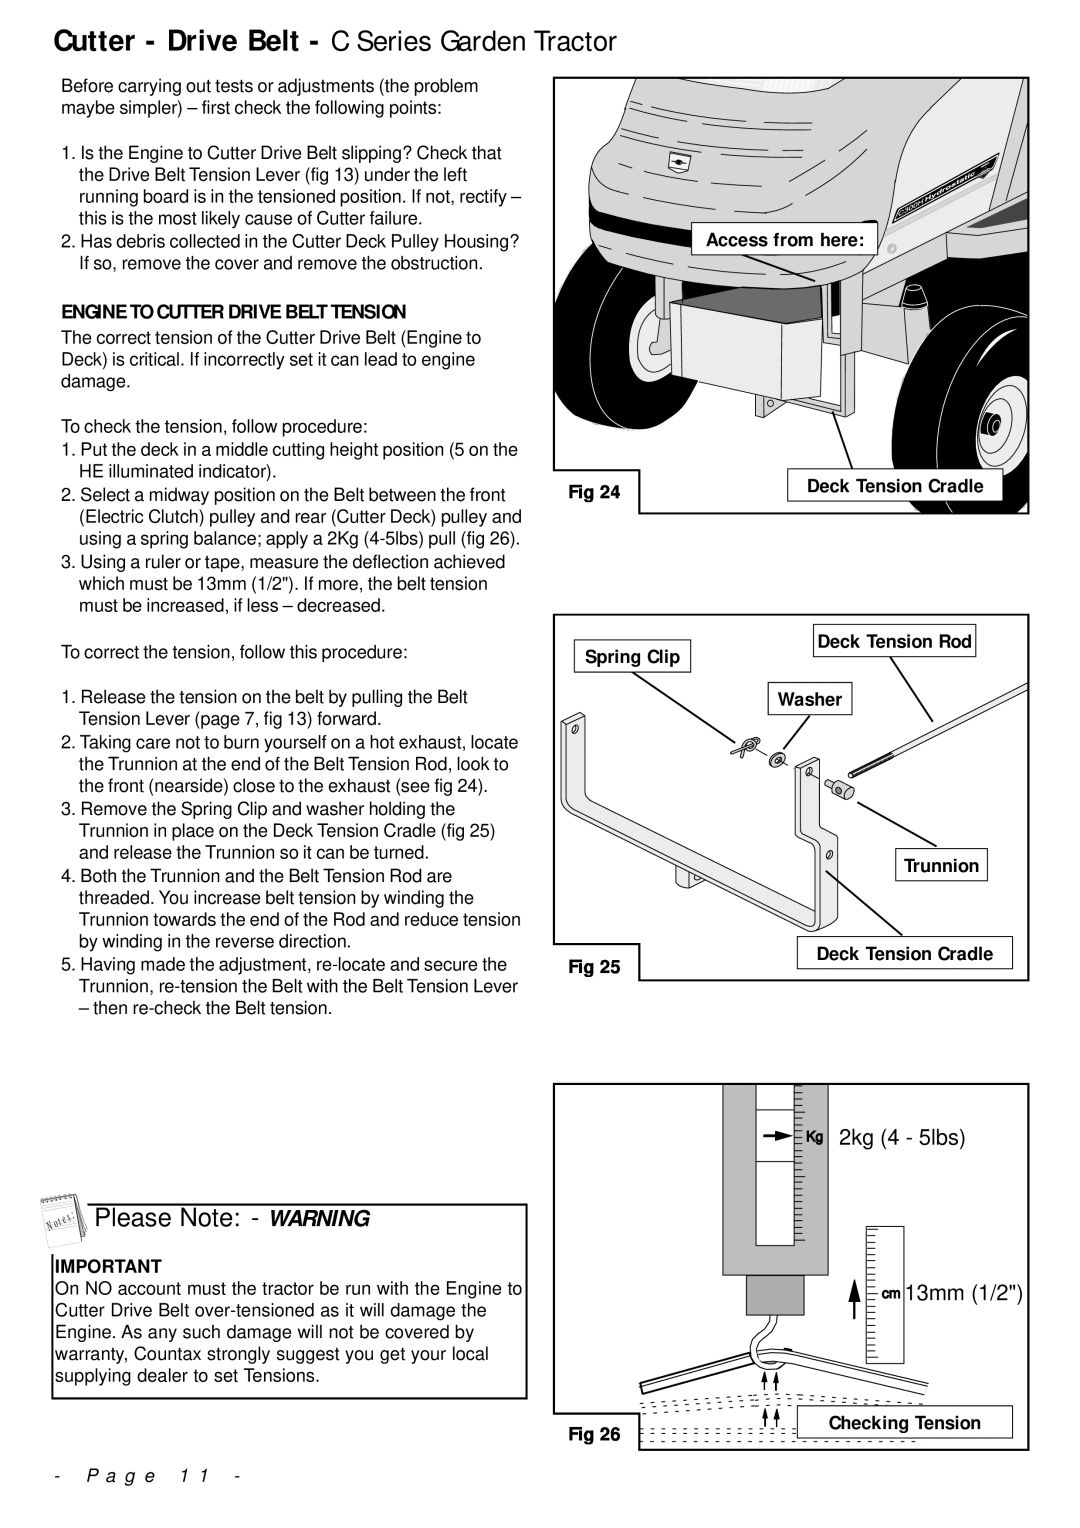 Countax manual Cutter - Drive Belt - C Series Garden Tractor, Please Note - WARNING, Engine To Cutter Drive Belt Tension 